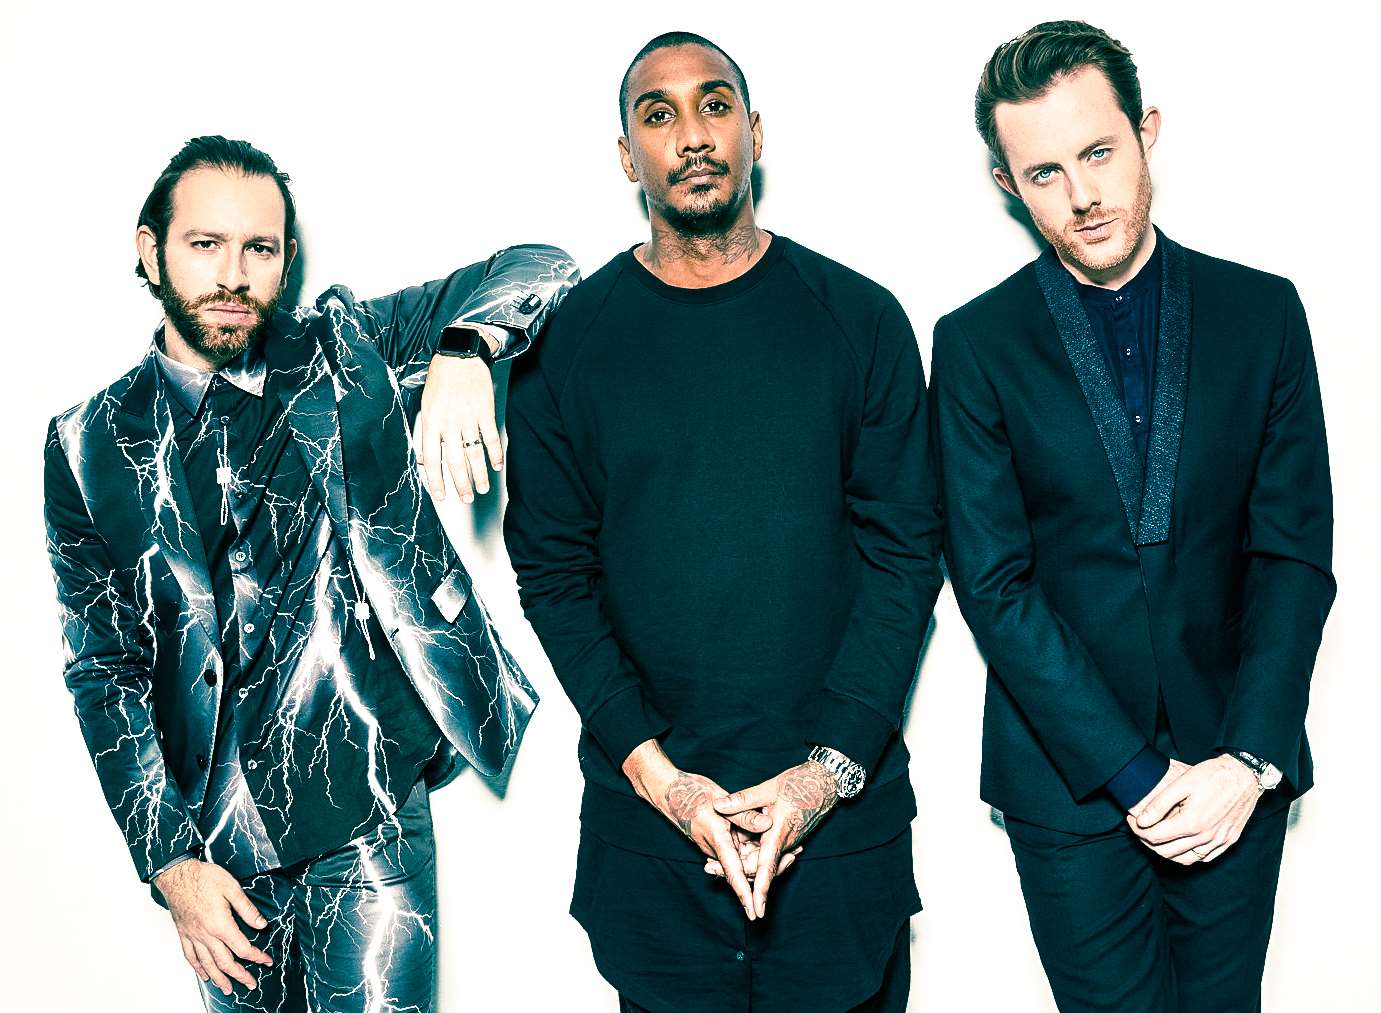 Chase & Status have been announced as headliners for the Southbeats Festival in Birchington